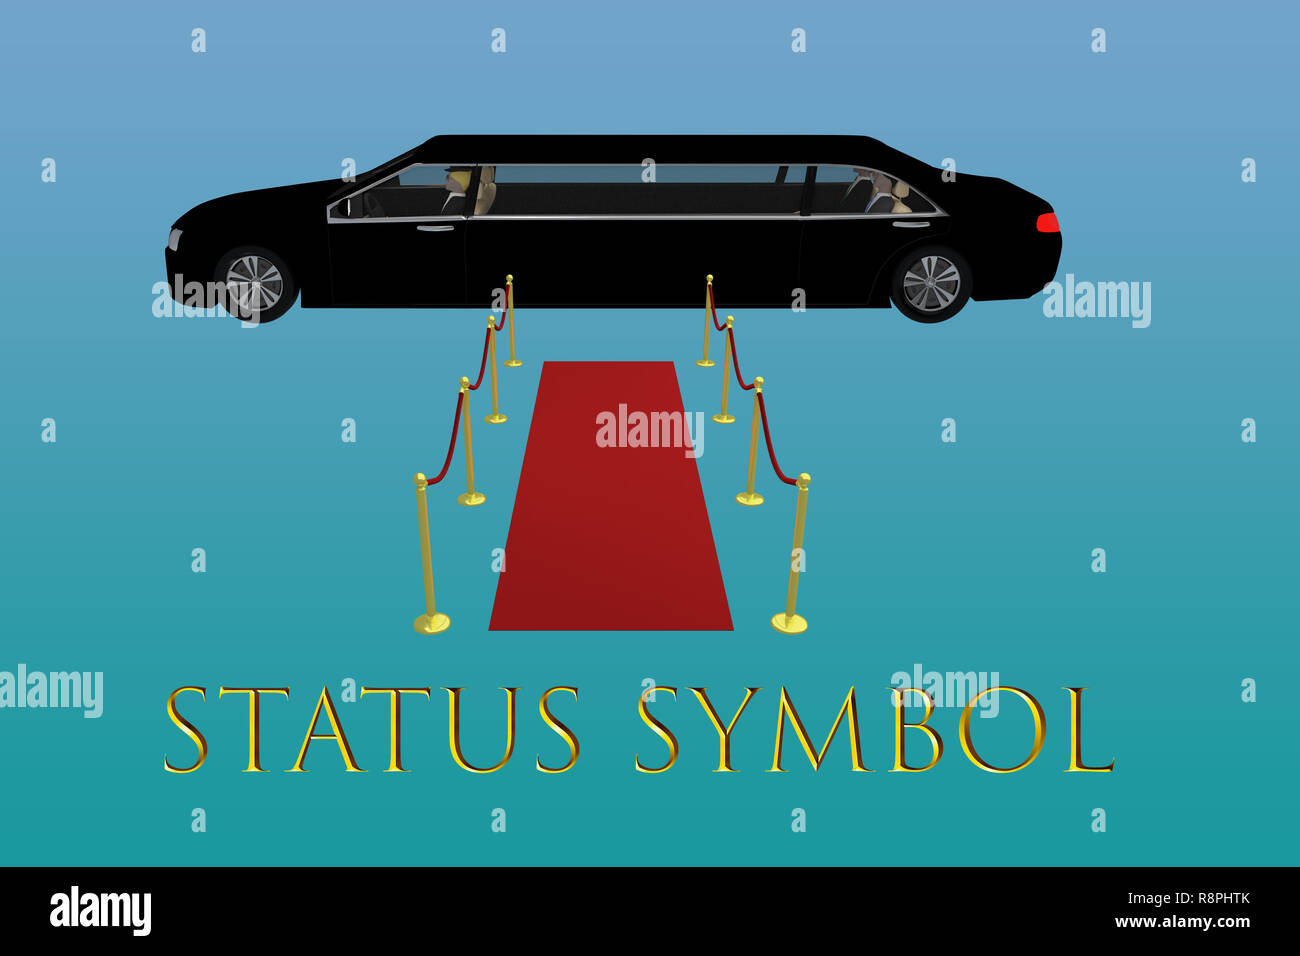 3D illustration of STATUS SYMBOL title in front of a red carpet in front of a black limousine, isolated on blue gradient background. Stock Photo